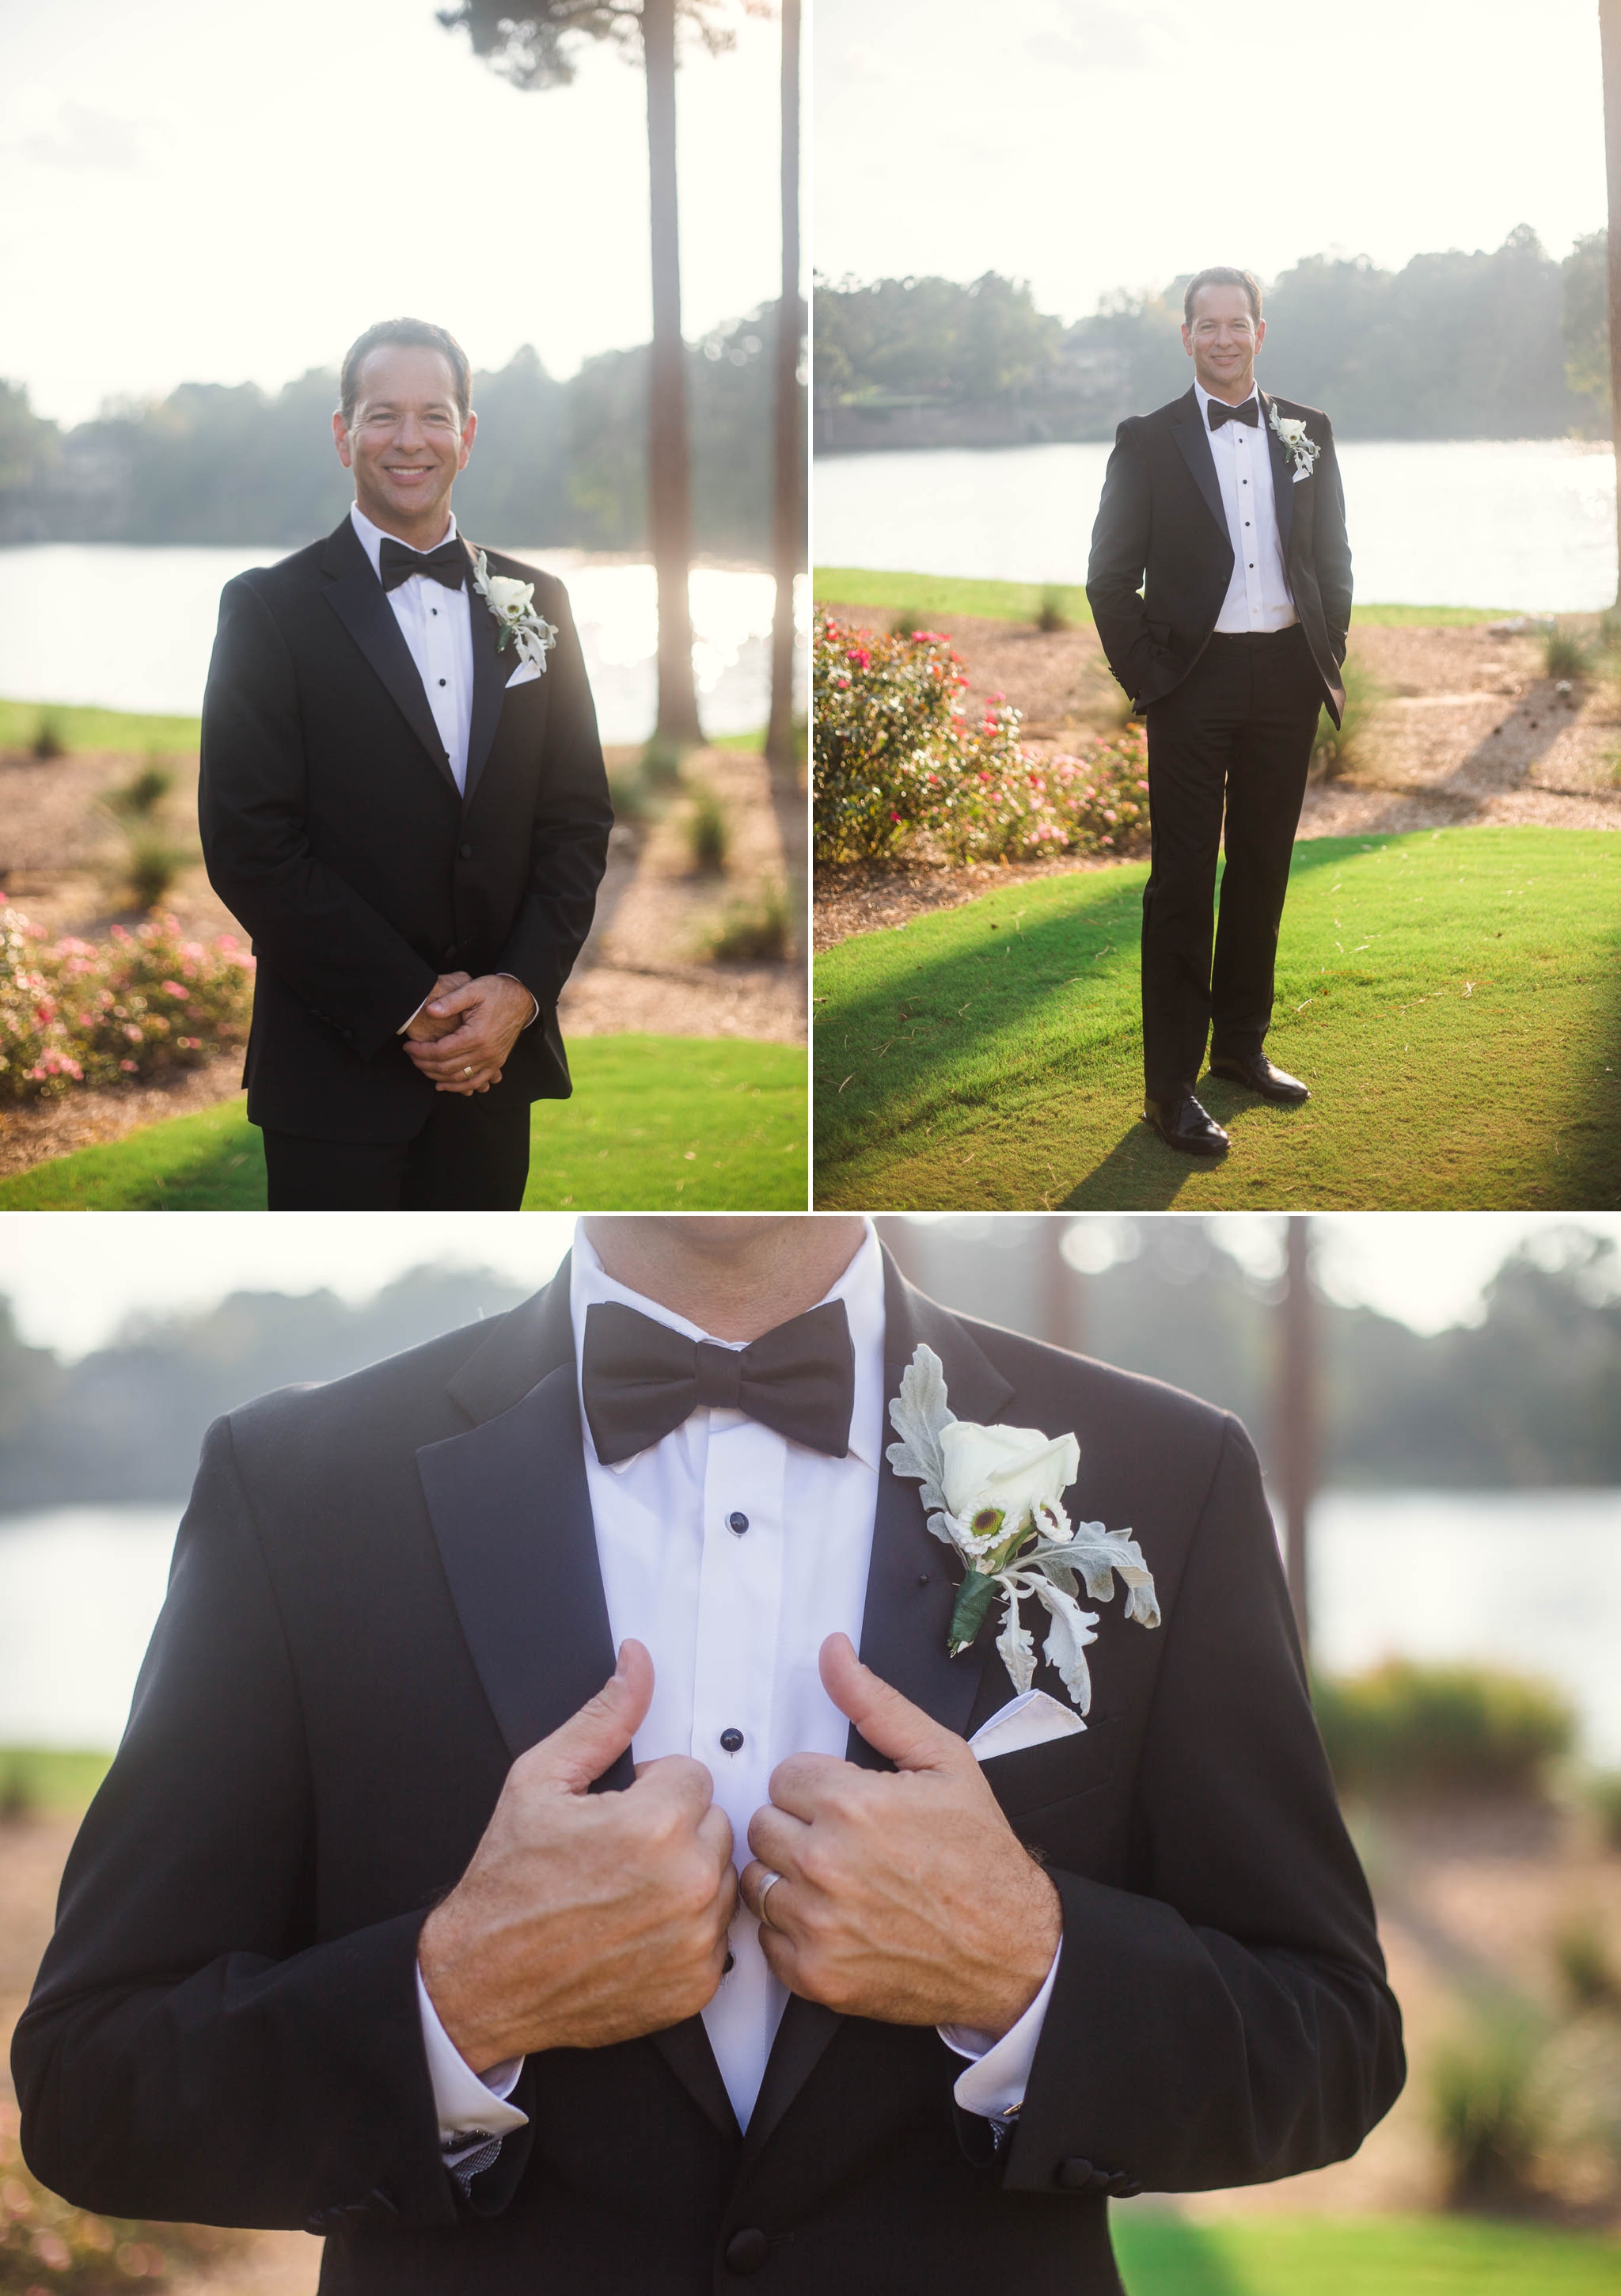 Groom Portraits - Dona + Doug - MacGregor Downs Country Club in Cary, NC - Raleigh Wedding Photographer